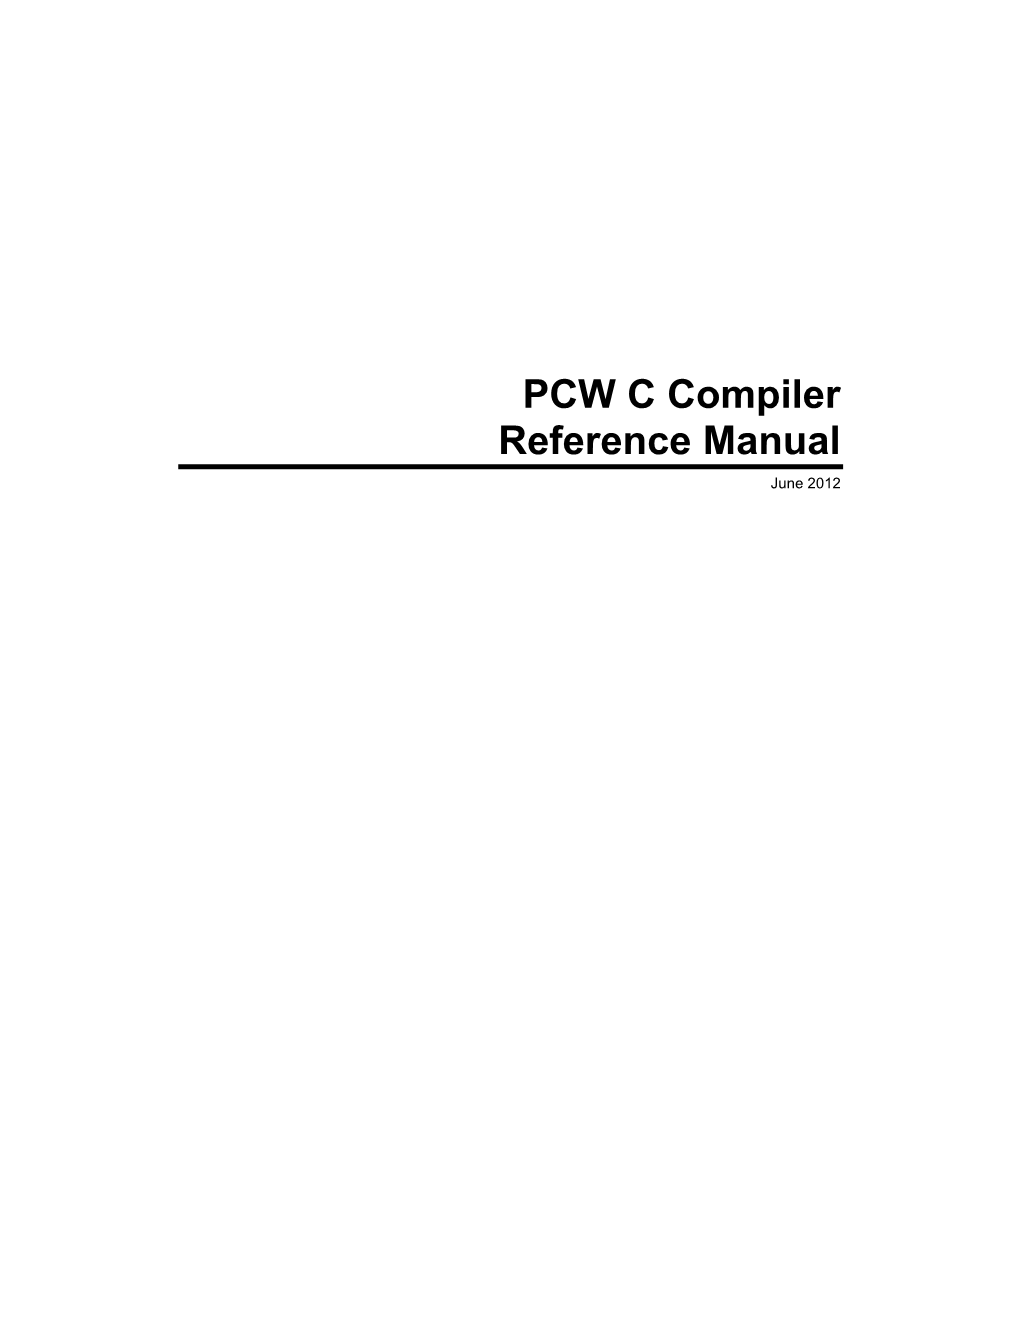 PCW C Compiler Reference Manual June 2012